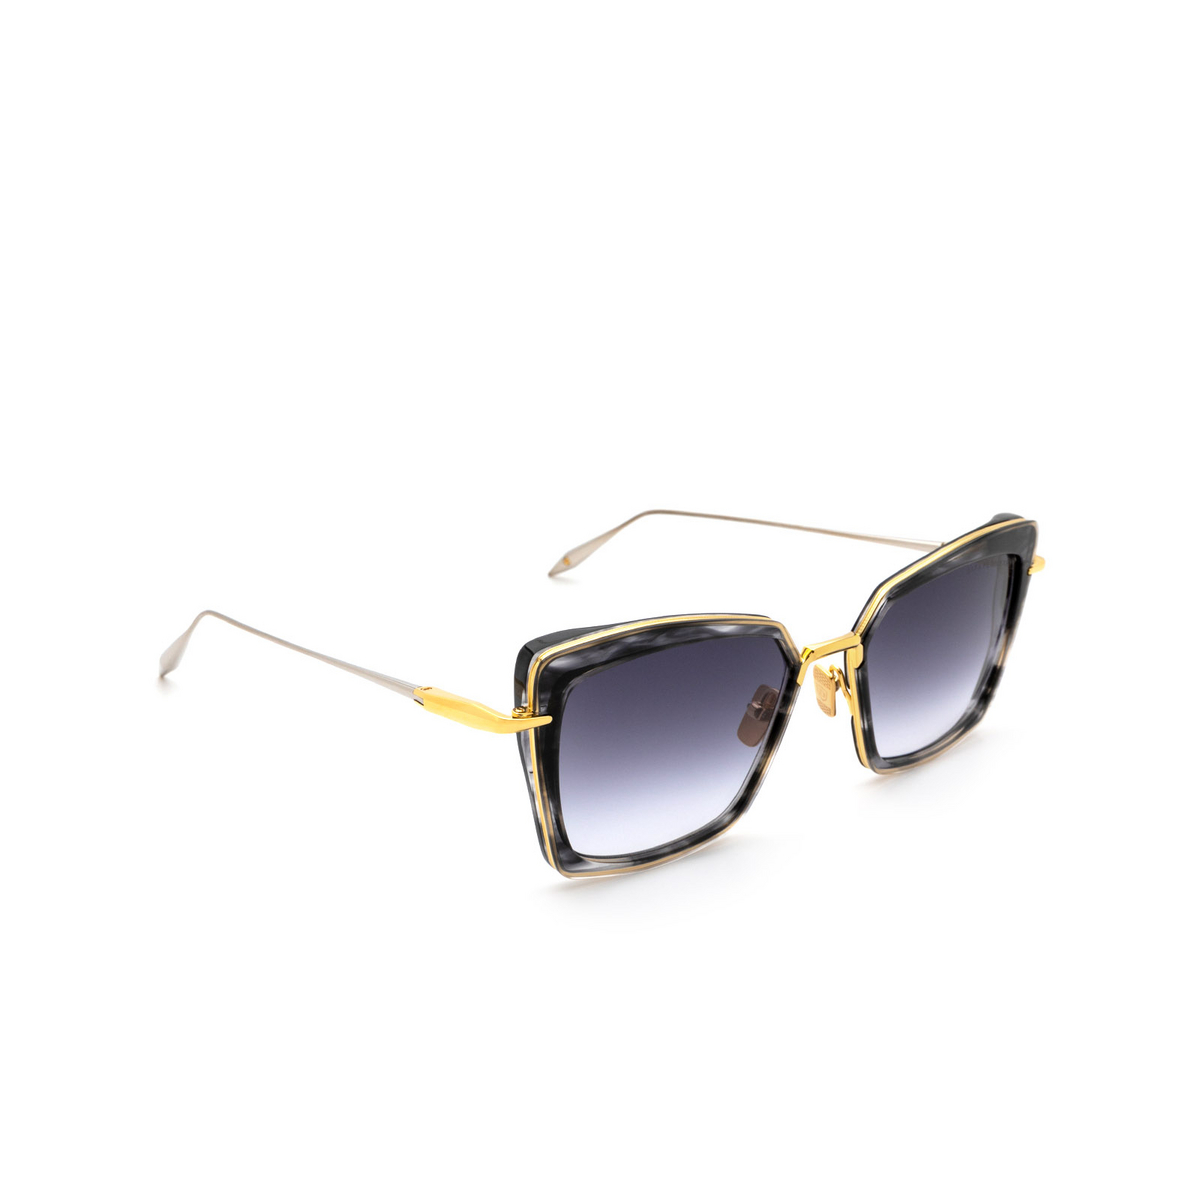 Dita® Butterfly Sunglasses: Perplexer DTS405-A-01 color Black Gold Blk-gld - three-quarters view.